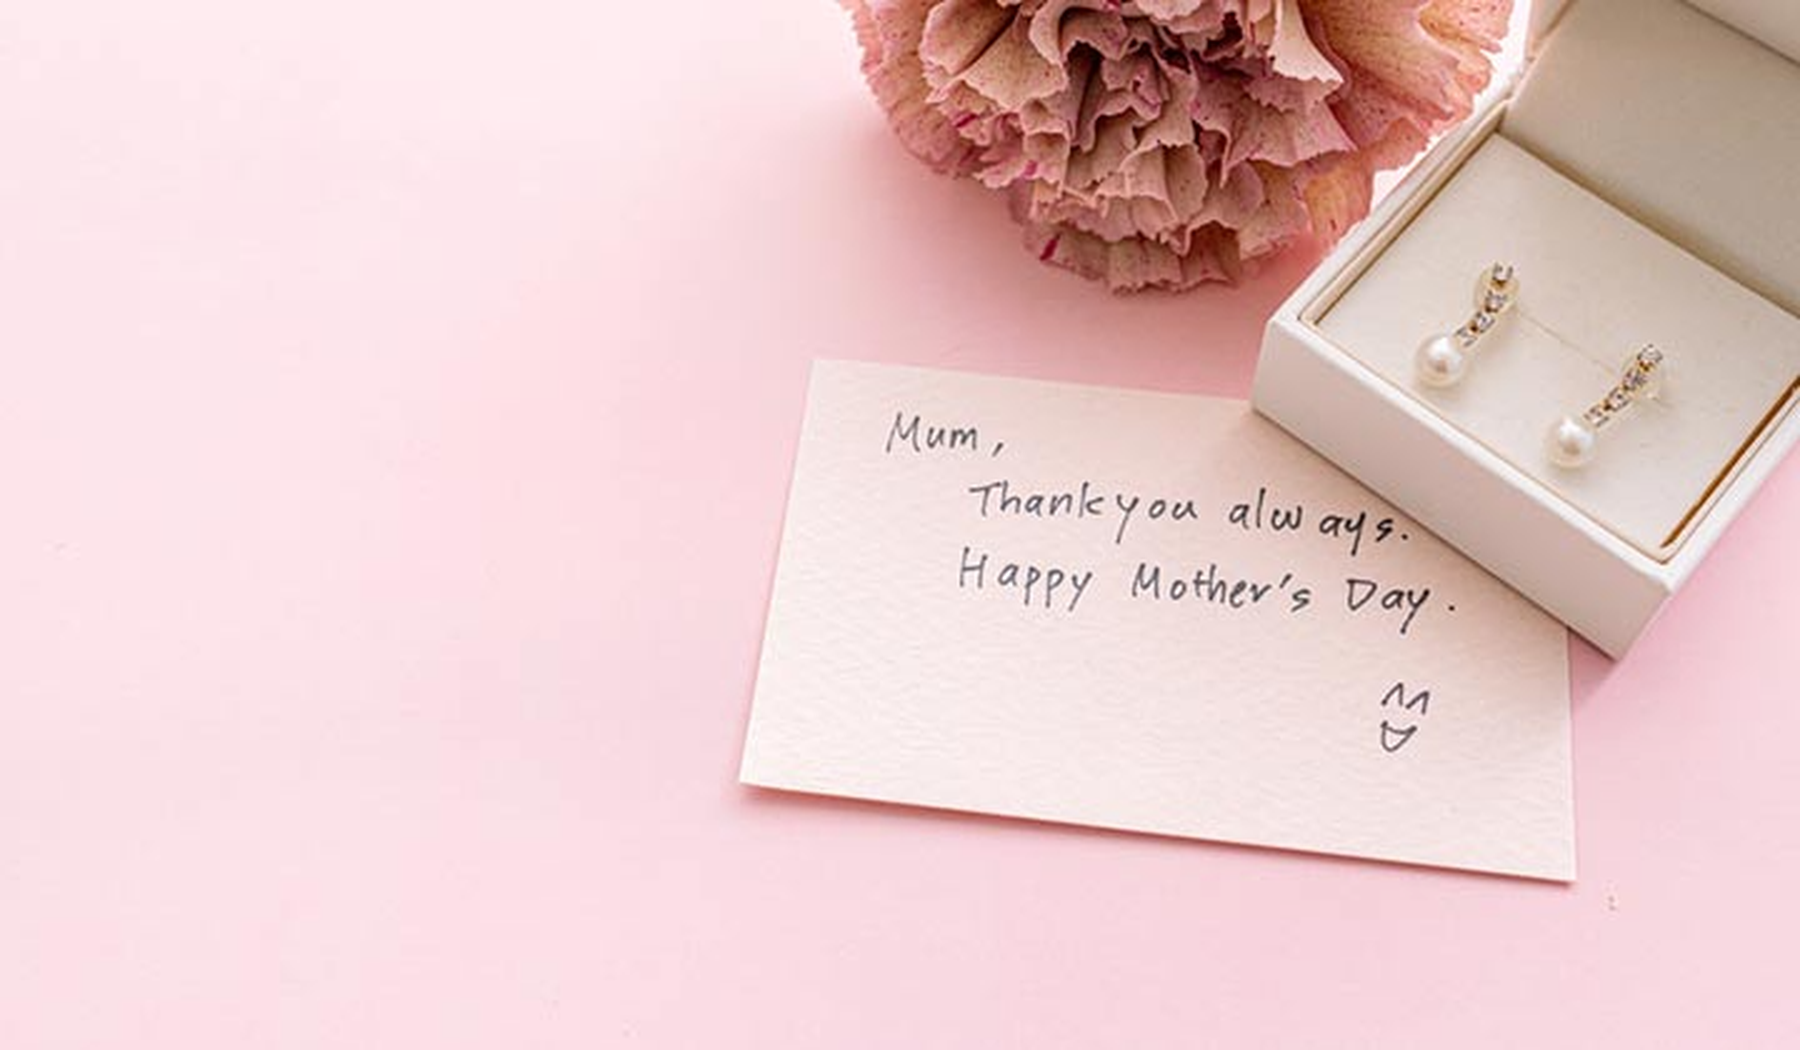 Earrings in a gift box with a note that says Happy Mother's Day